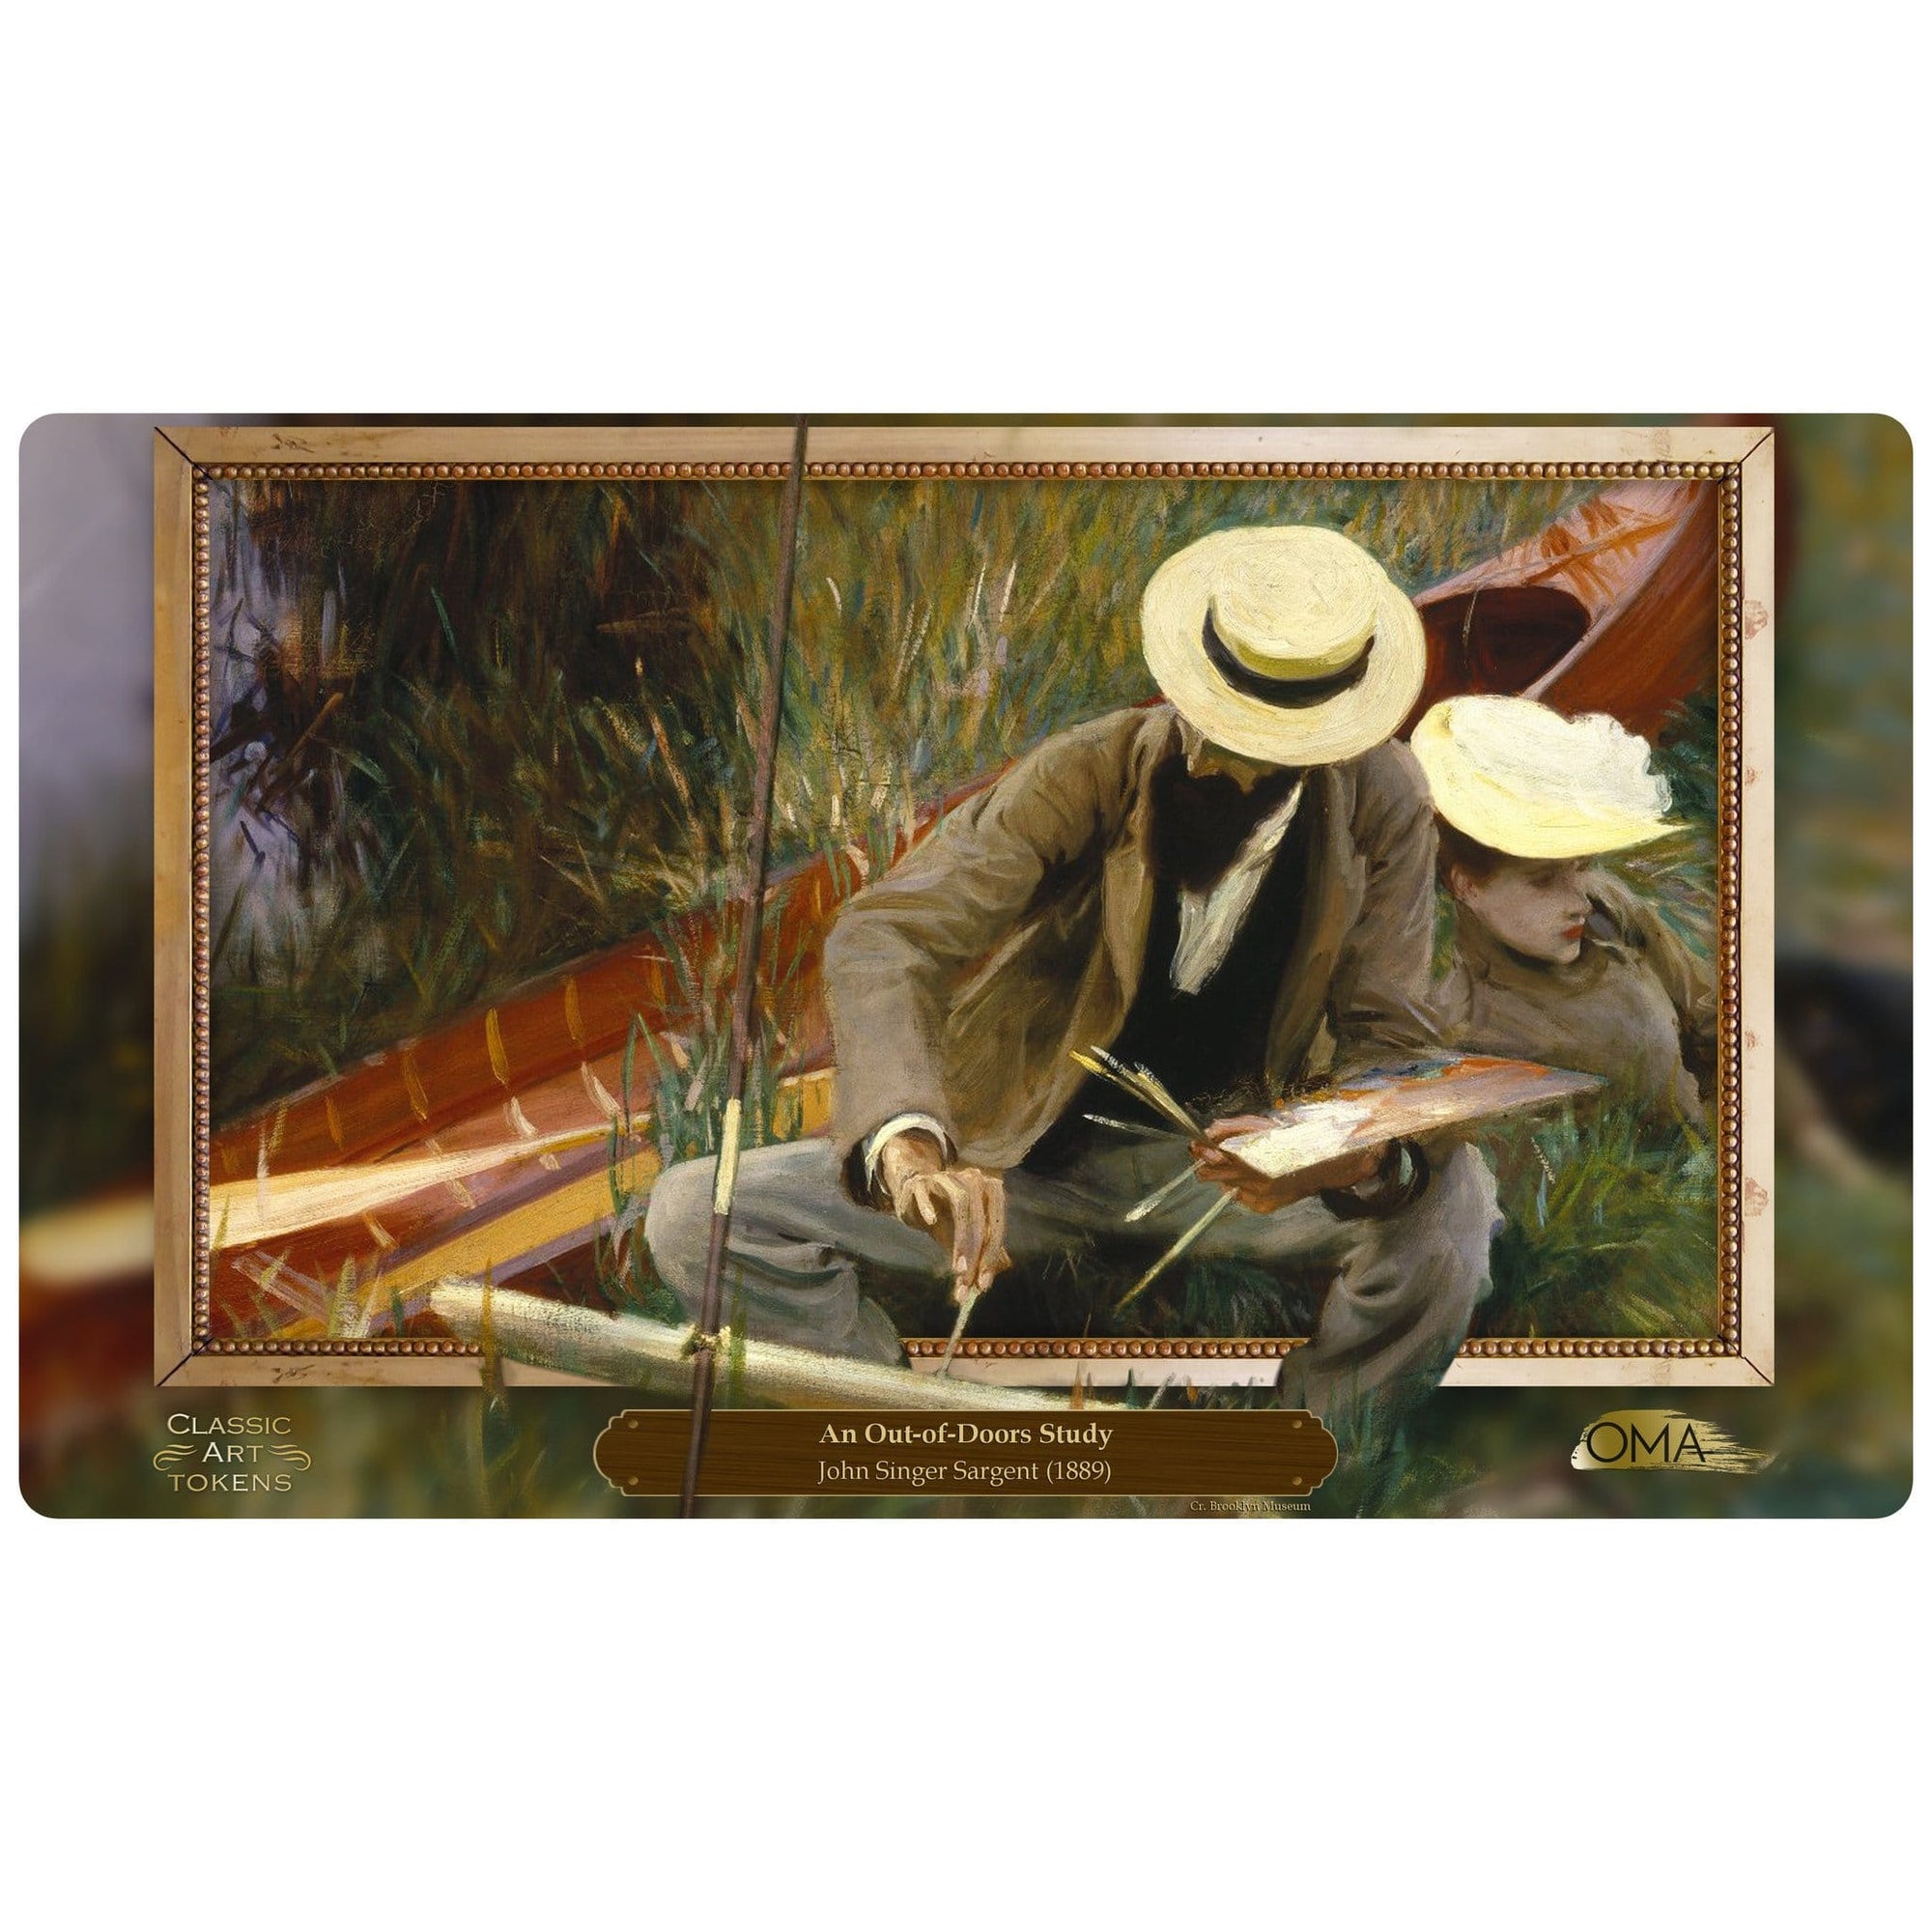 Copy Playmat by John Singer Sargent - Playmat - Original Magic Art - Accessories for Magic the Gathering and other card games